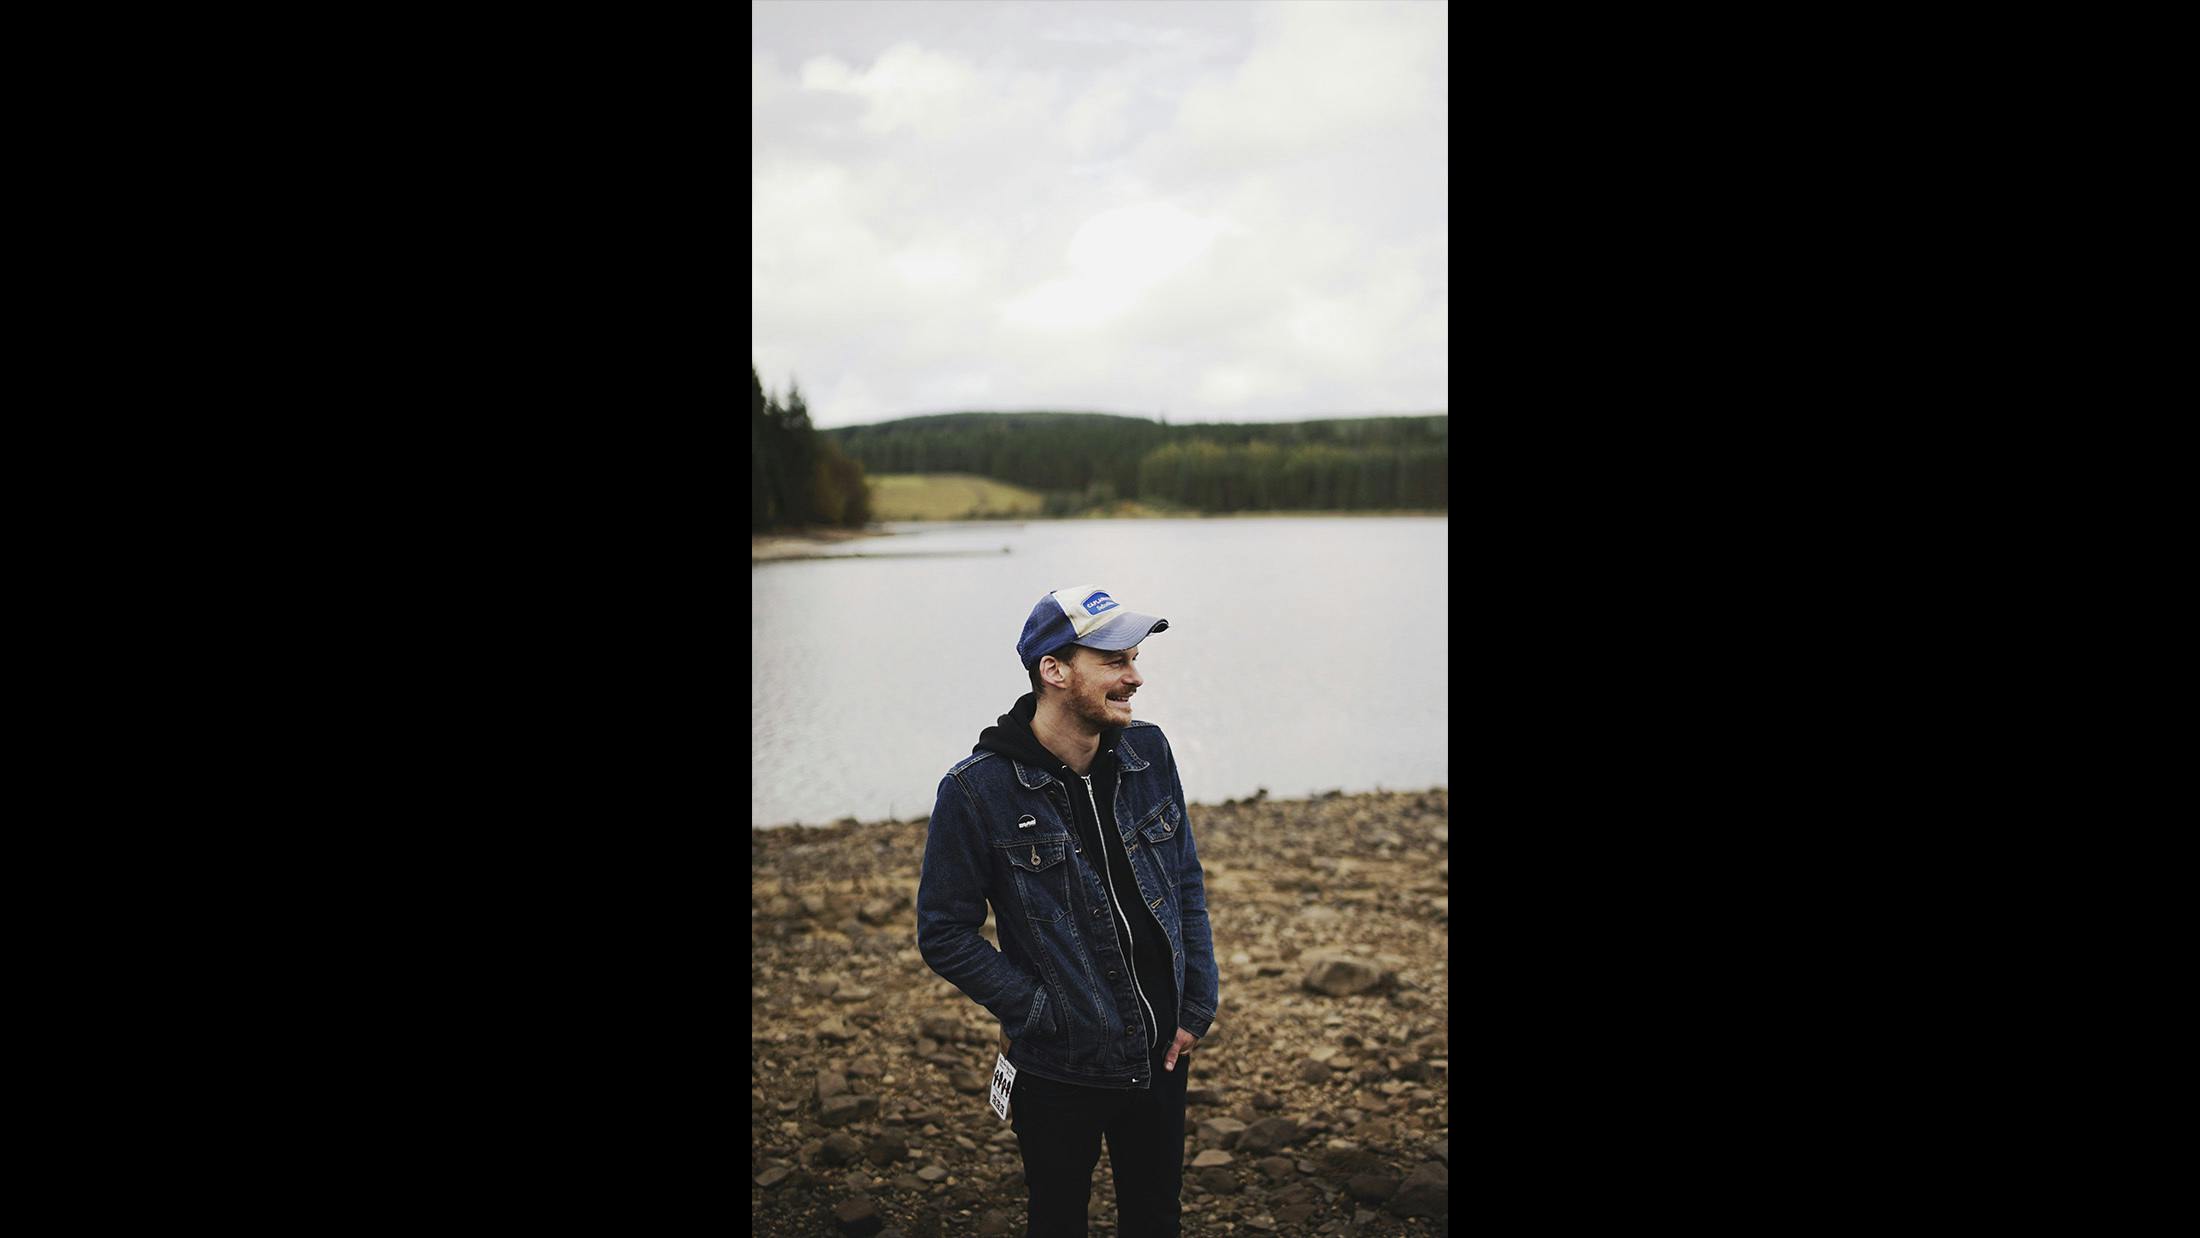 One of the very few days off. This time we went to the Kielder Park Forest in England. After playing a lot of shows it's nice to walk around in beautiful forests and take it easy.